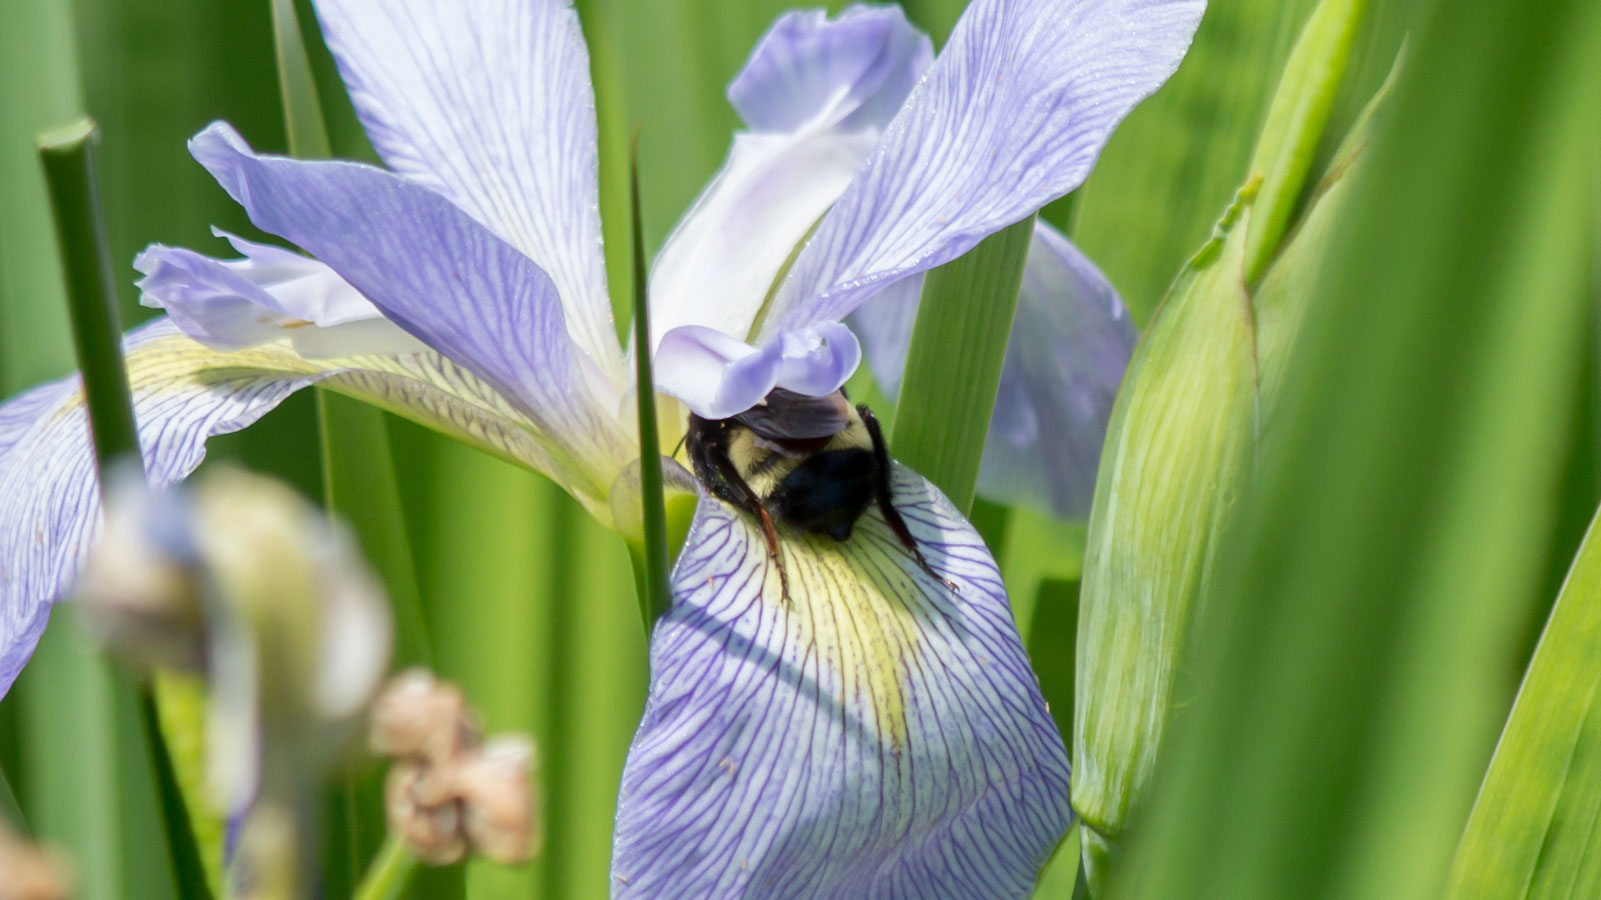 American bumblebee on a southern blue flag iris flower